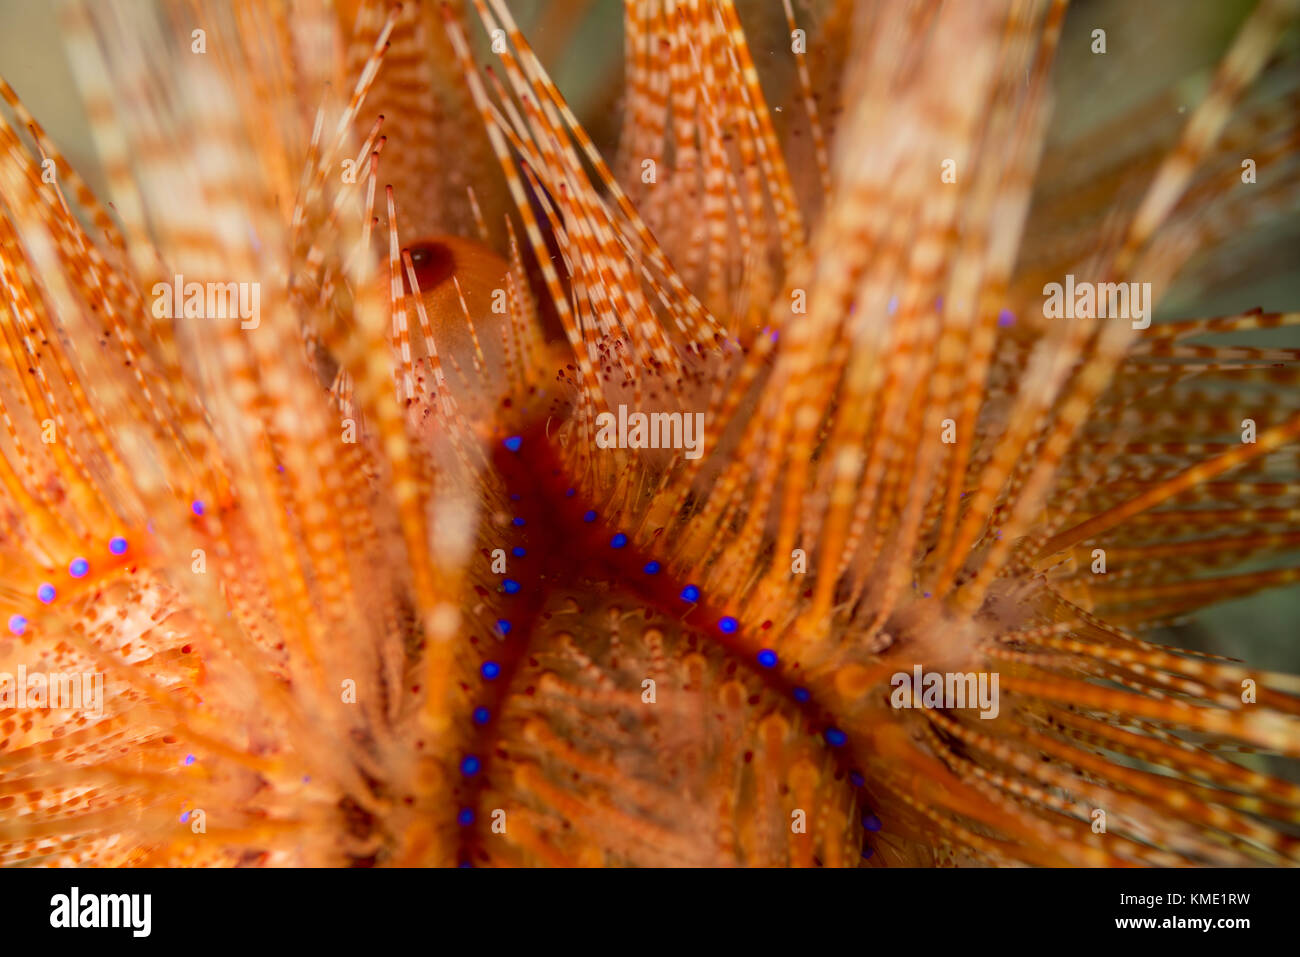 Blue-spotted sea urchin displaying its vibrant colors Stock Photo